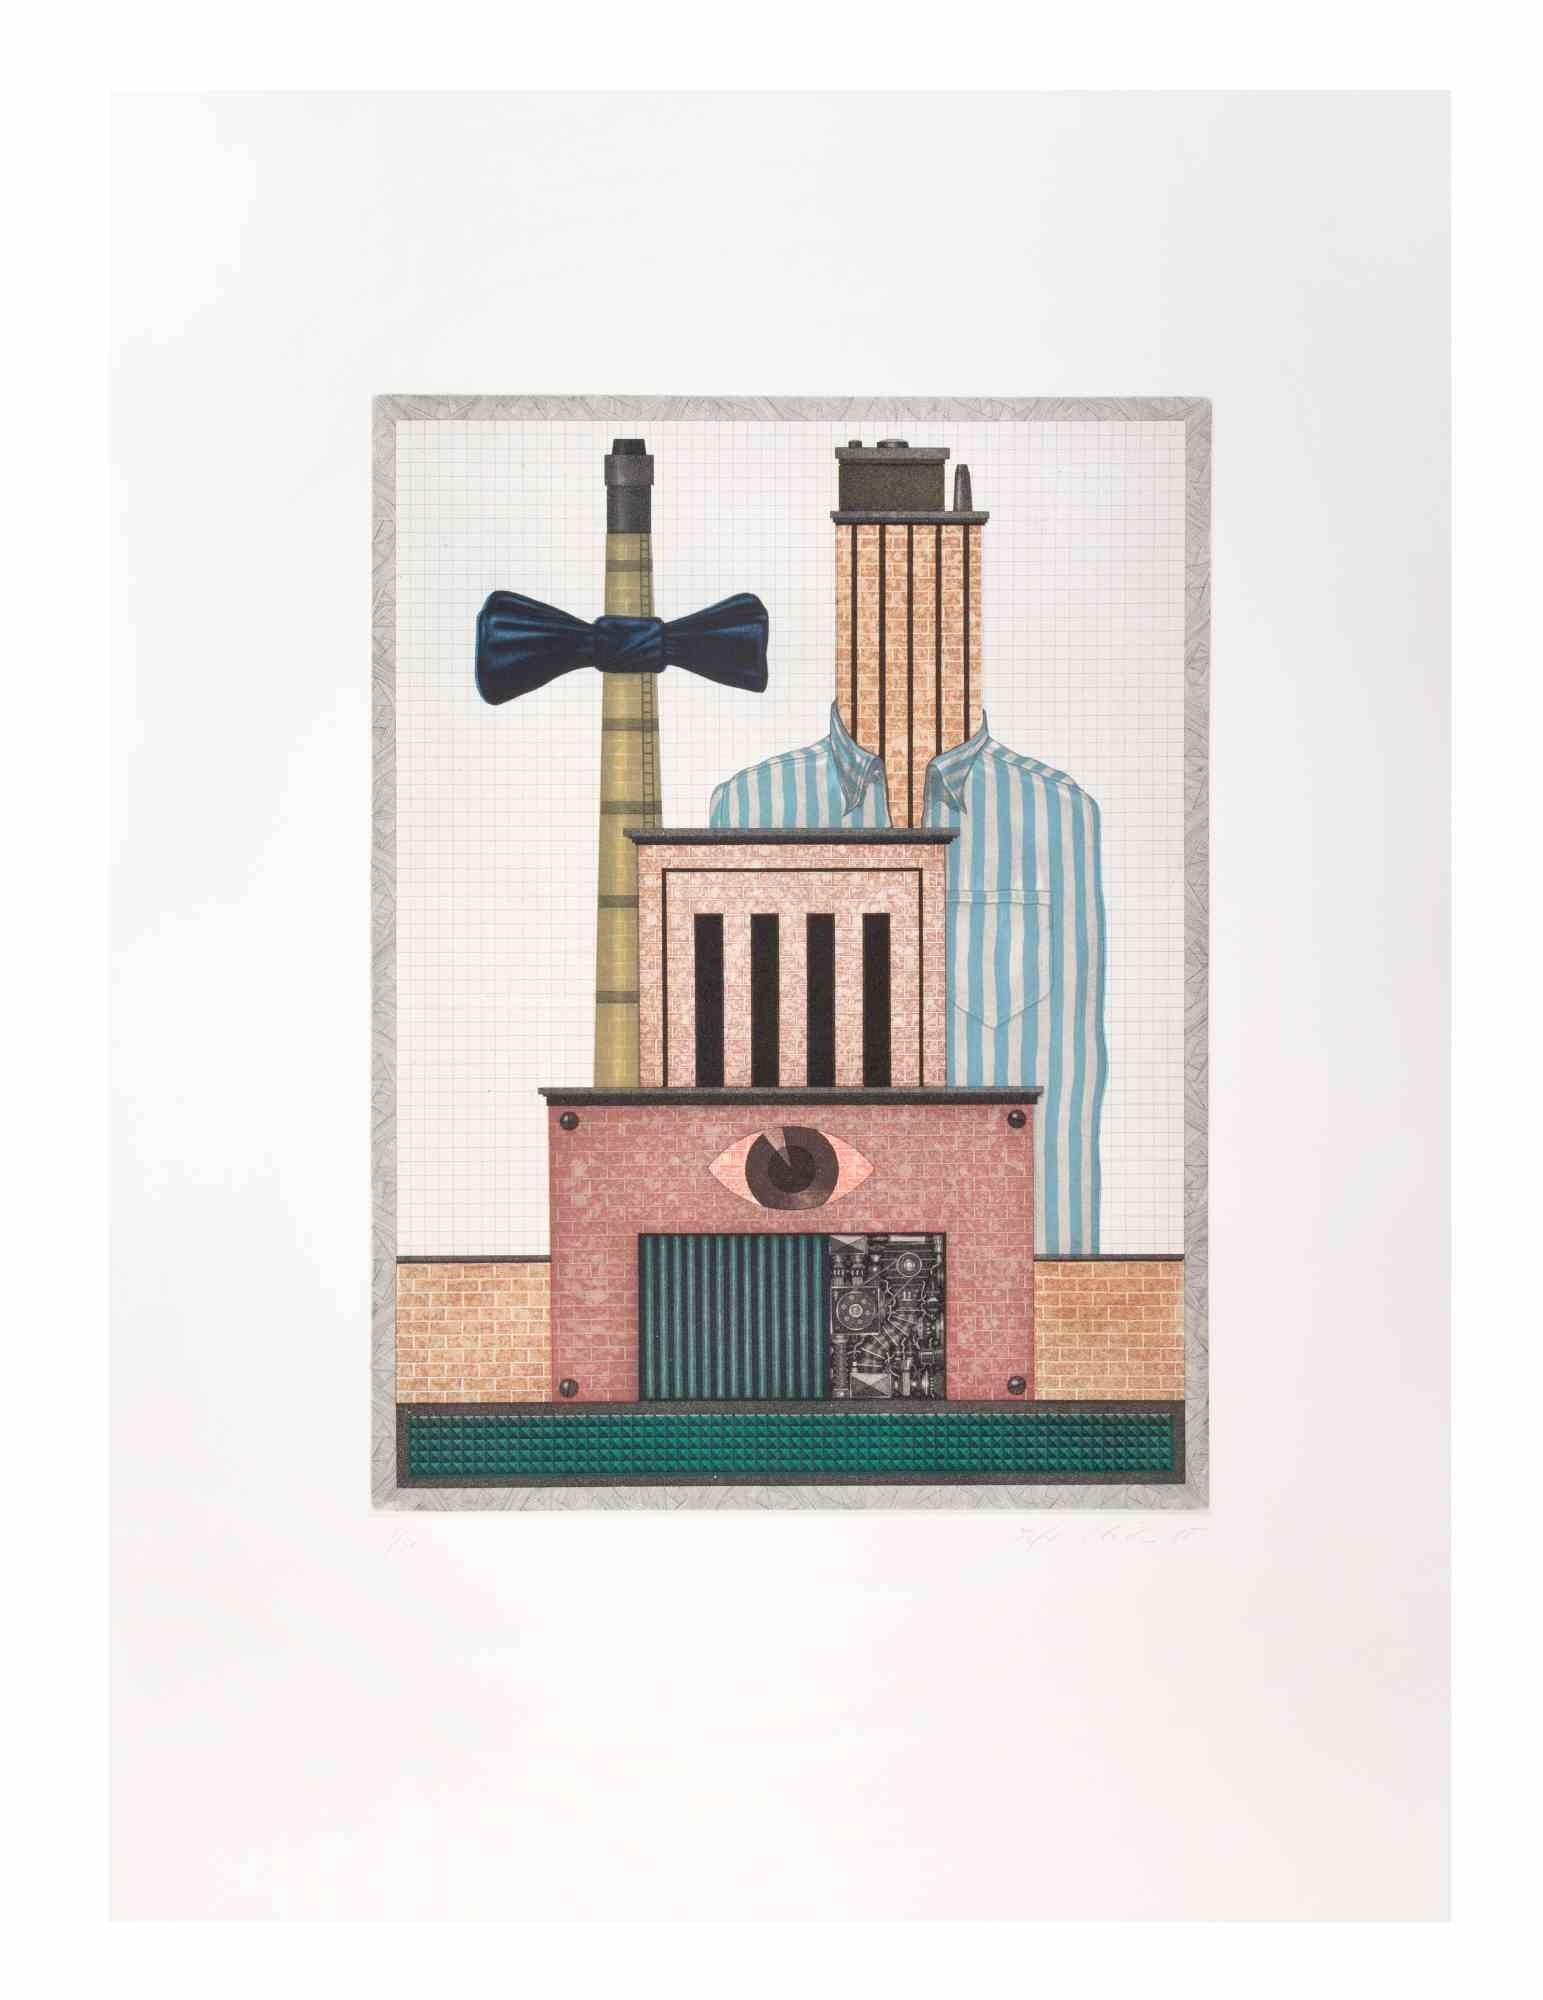 Brauerei is a  contemporary artwork realized by the artist Fifo Stricker in 1985.

Mixed colored aquatint and etching.

